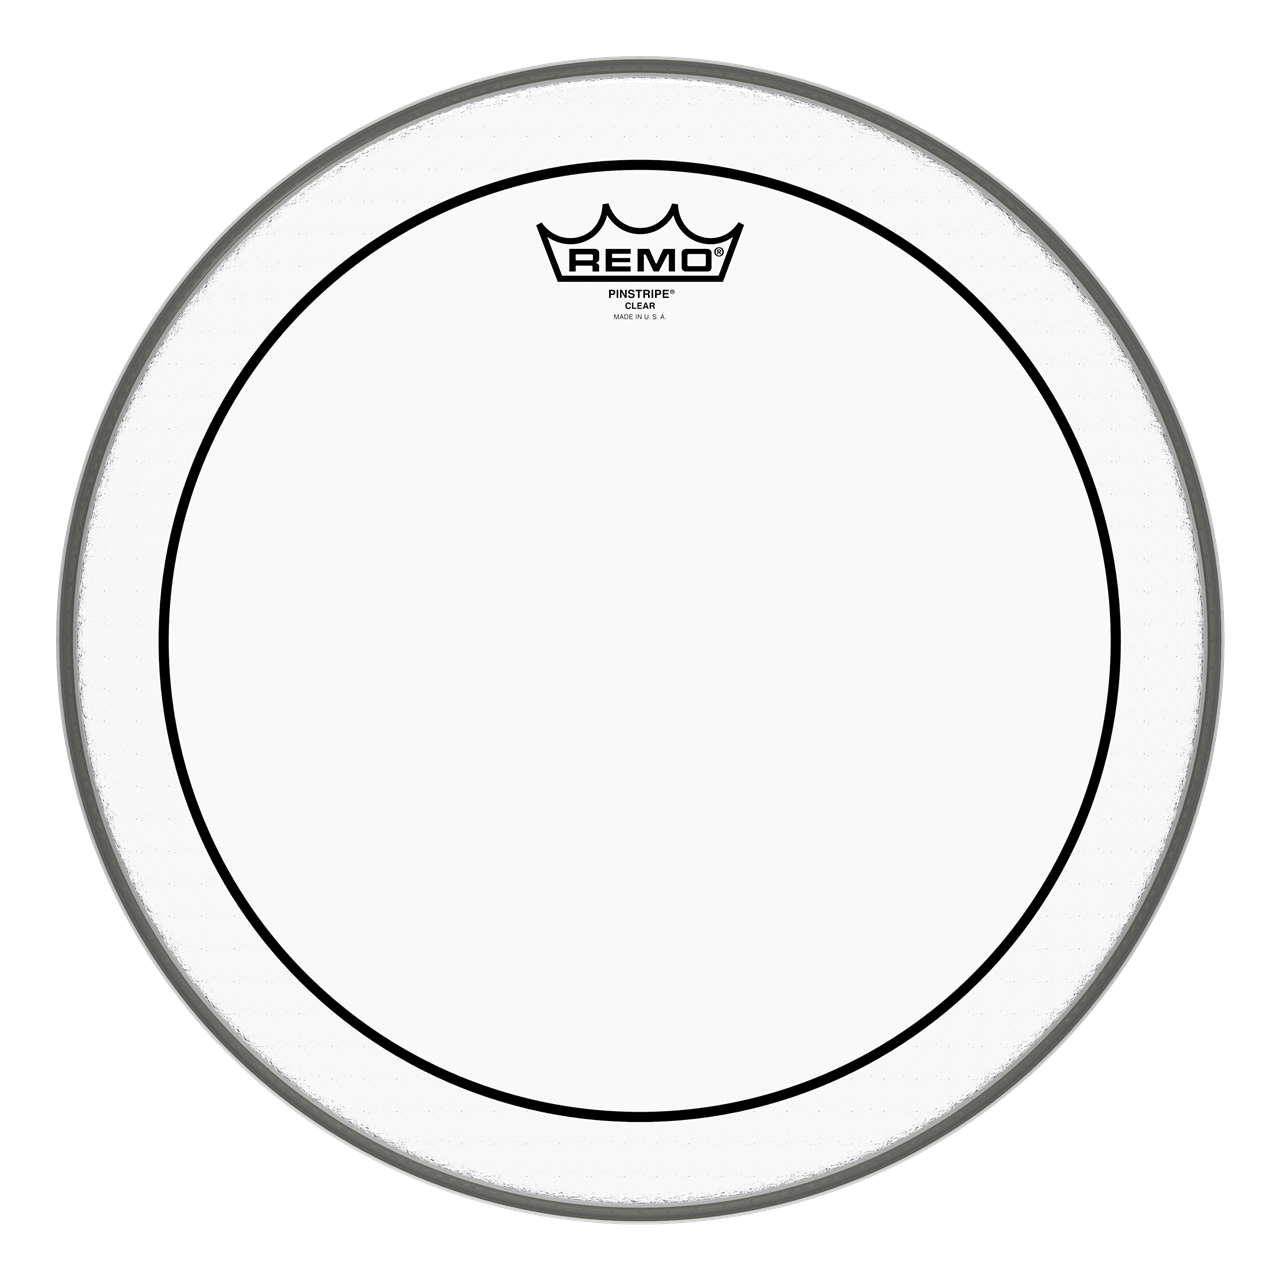 Remo PS-0312-00 Pinstripe Clear, 12"